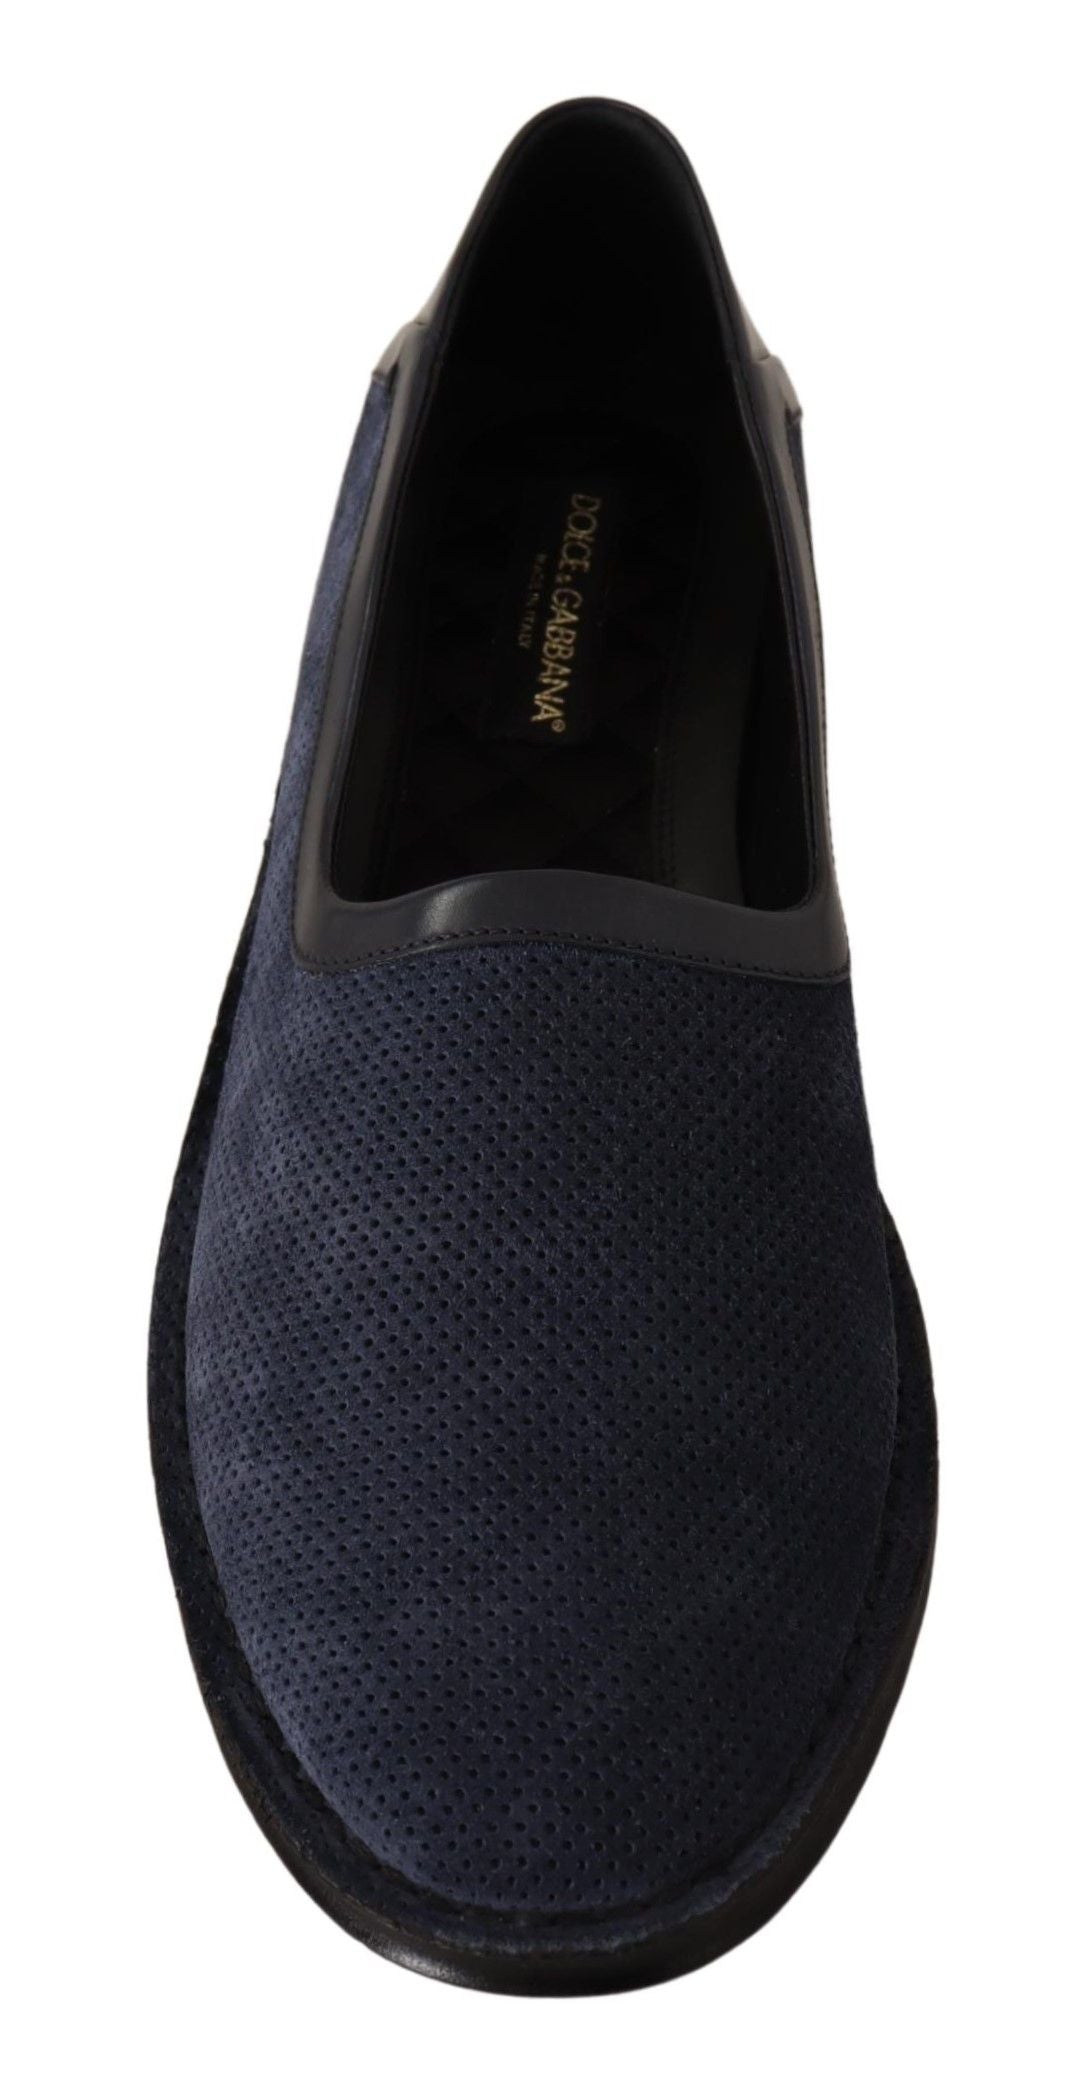 Dolce & Gabbana Elegant Perforated Leather Loafers